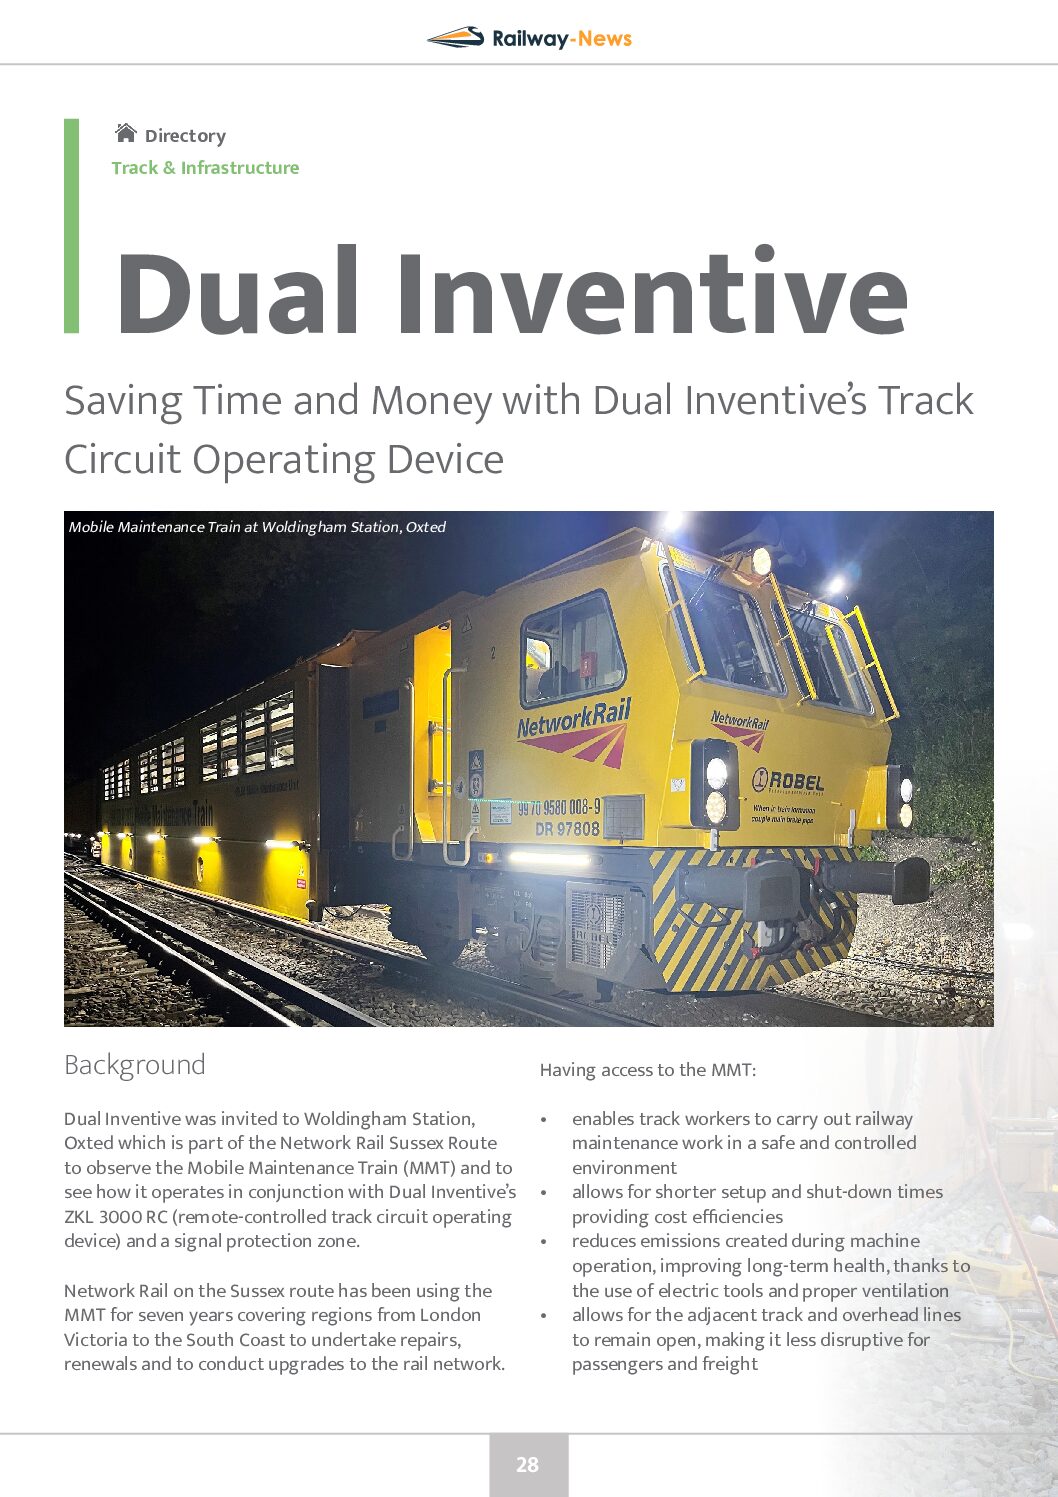 Saving Time and Money with Dual Inventive’s Track Circuit Operating Device